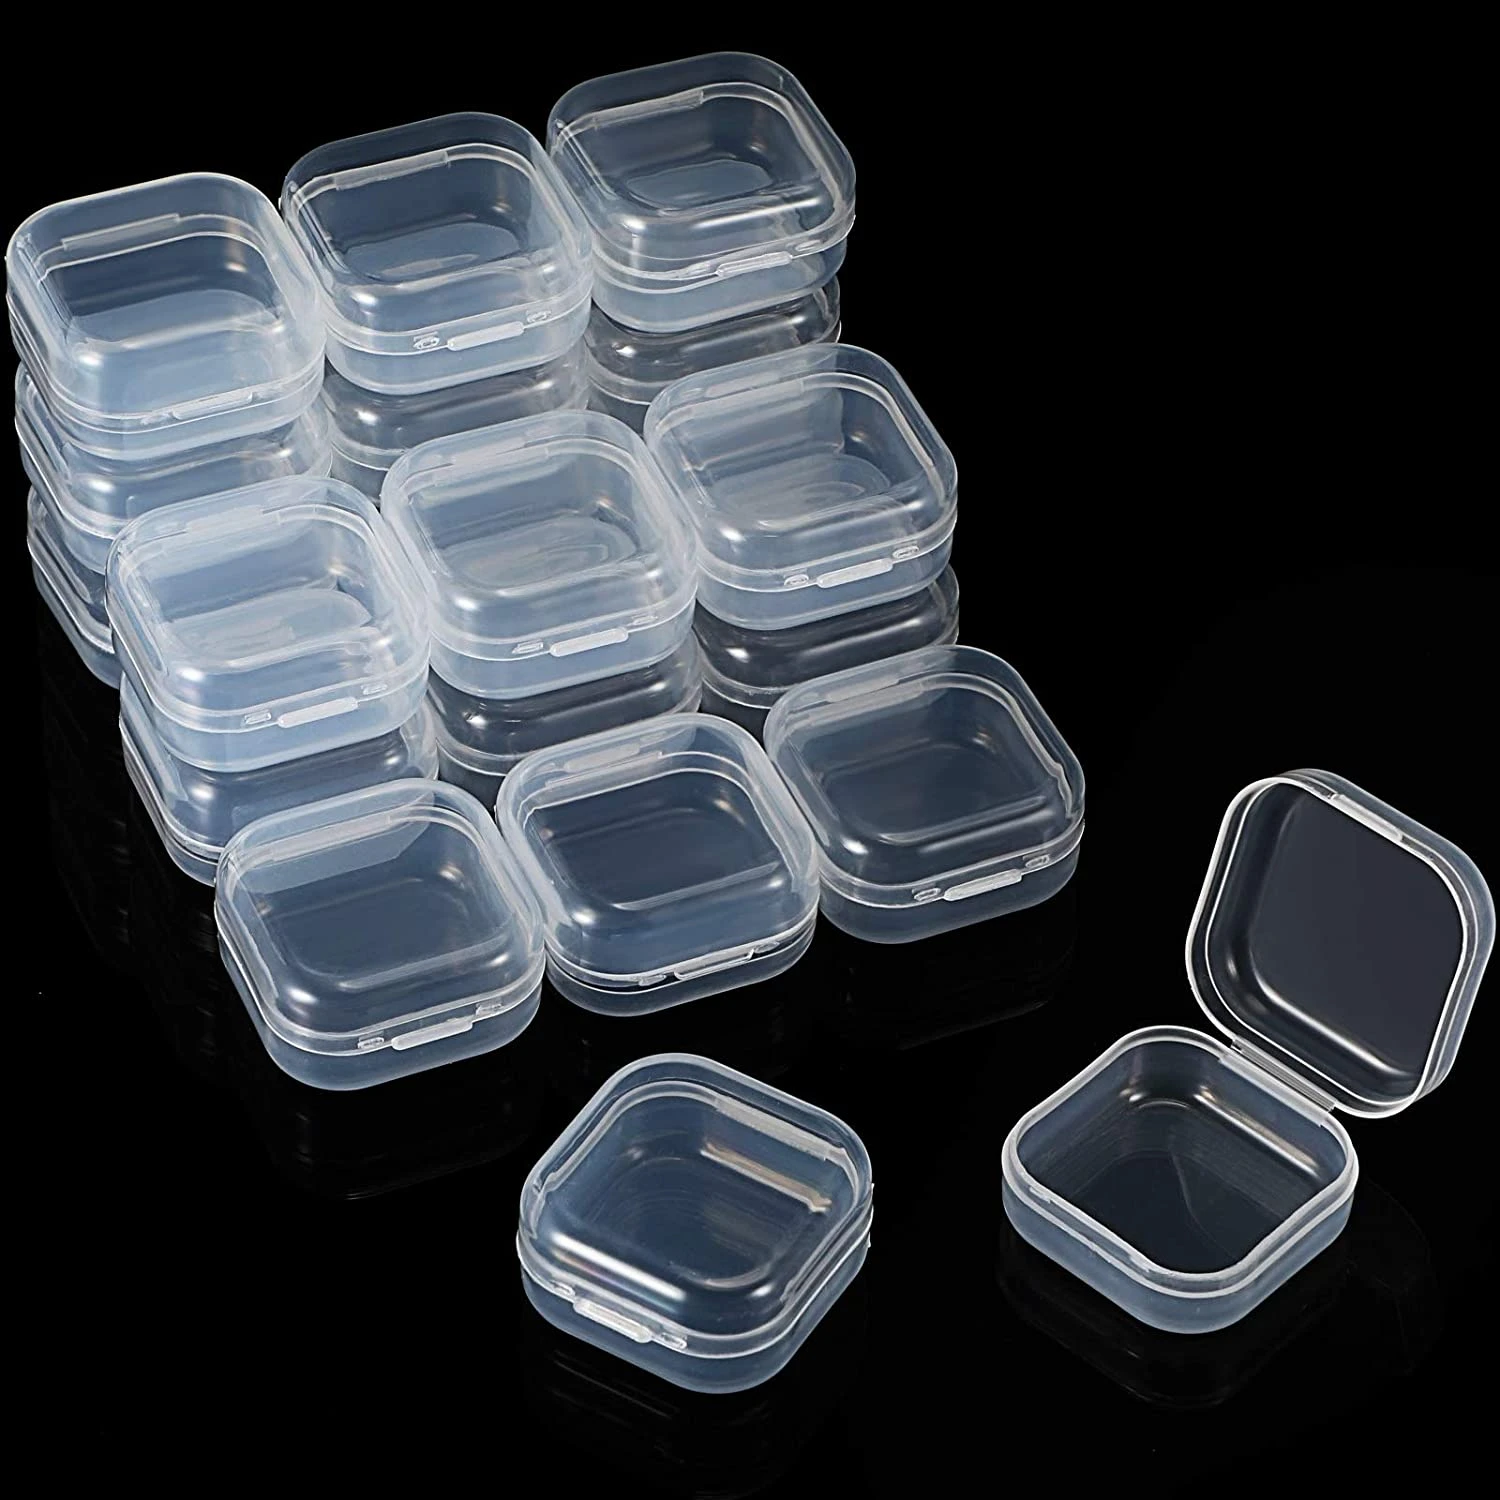 50Pcs Small Boxes Square Transparent Plastic Box Jewelry Storage Case Finishing Container Packaging Storage Box for Earrings